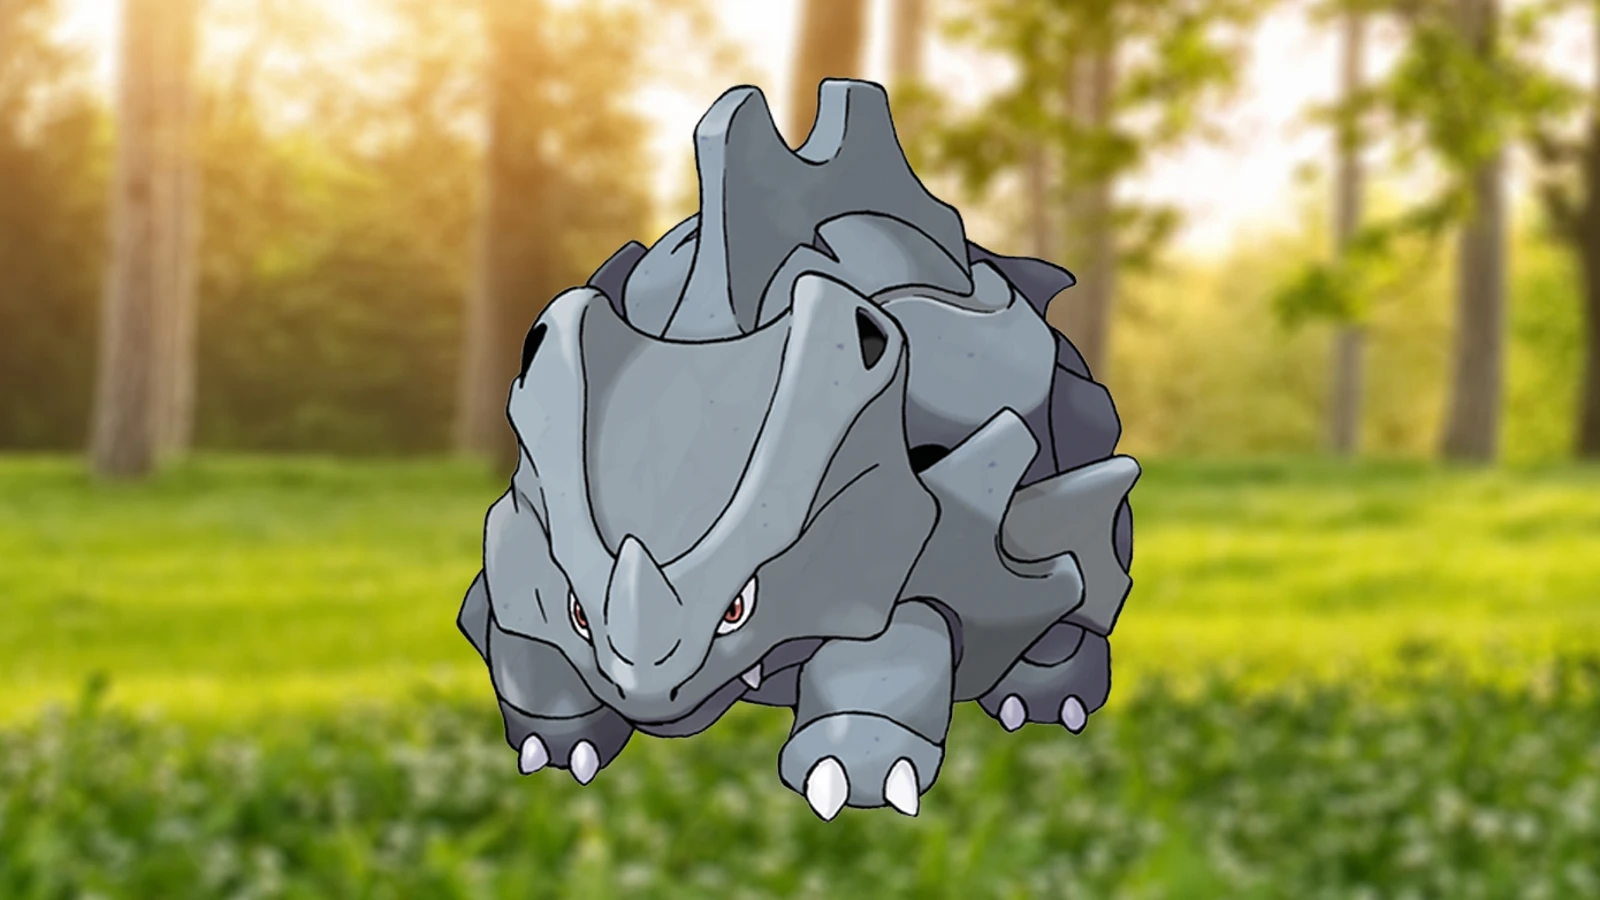 The Pokémon Go spotlight creature this week is Rhyhorn, which means statistical chances of catching a shiny go up. 